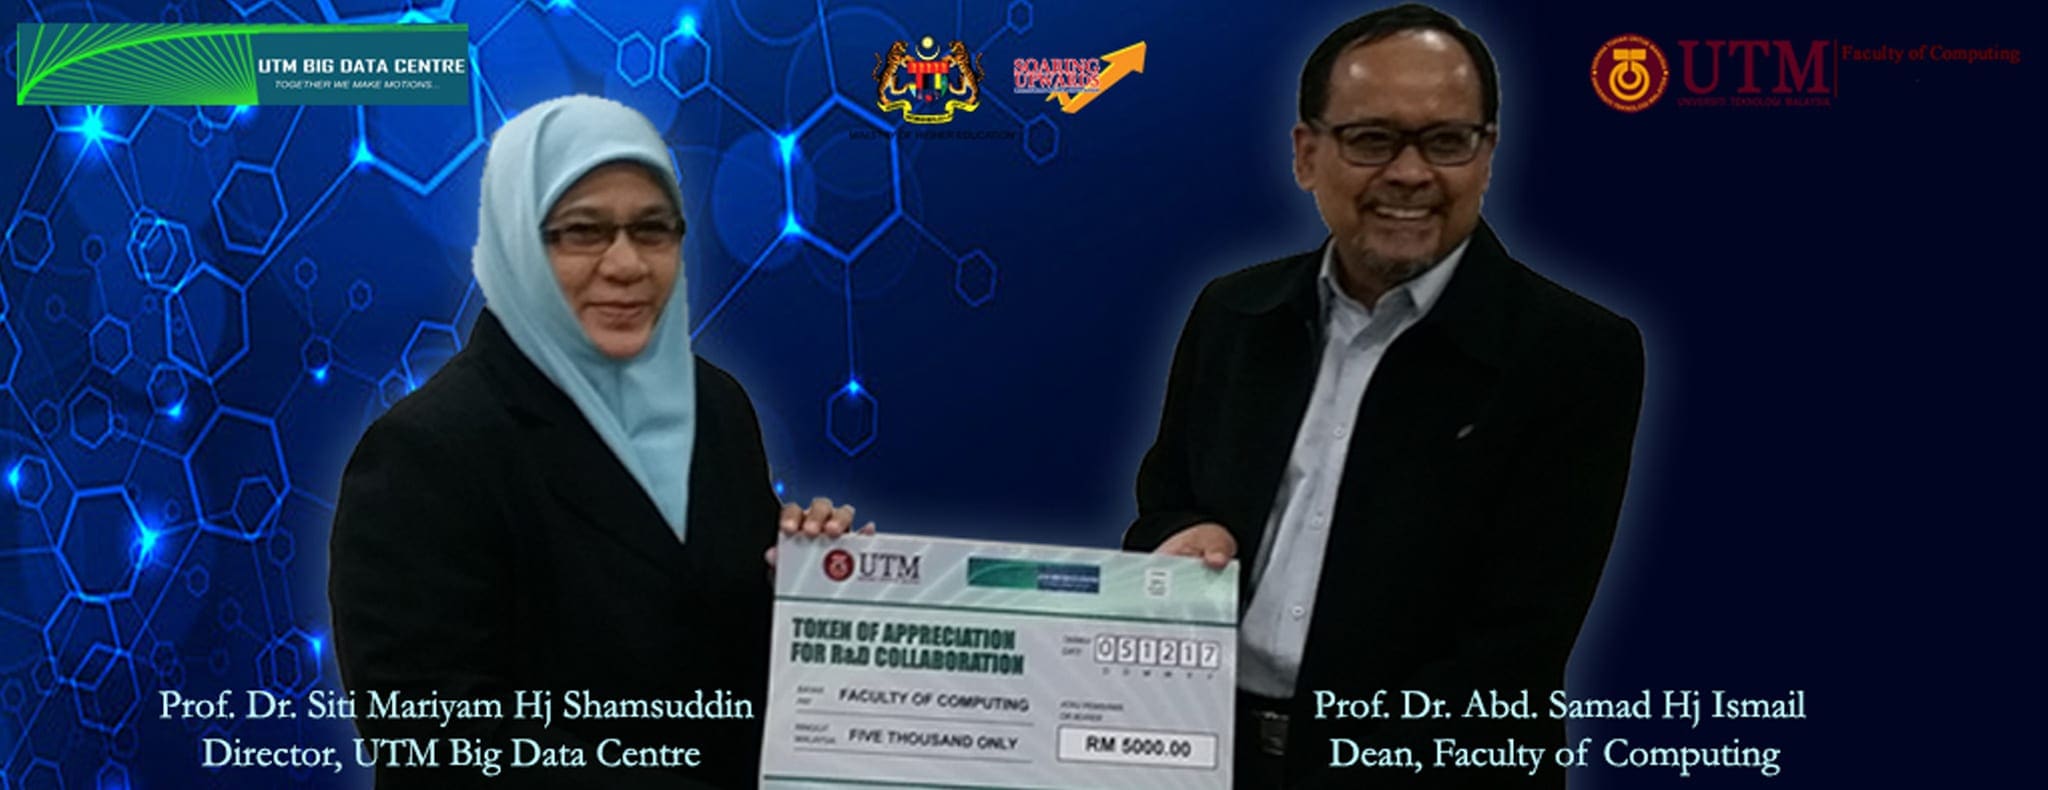 5 Dec : UTM BDC Handing Over Token of Appreciation to Faculty of Computing for R & D Collaboration